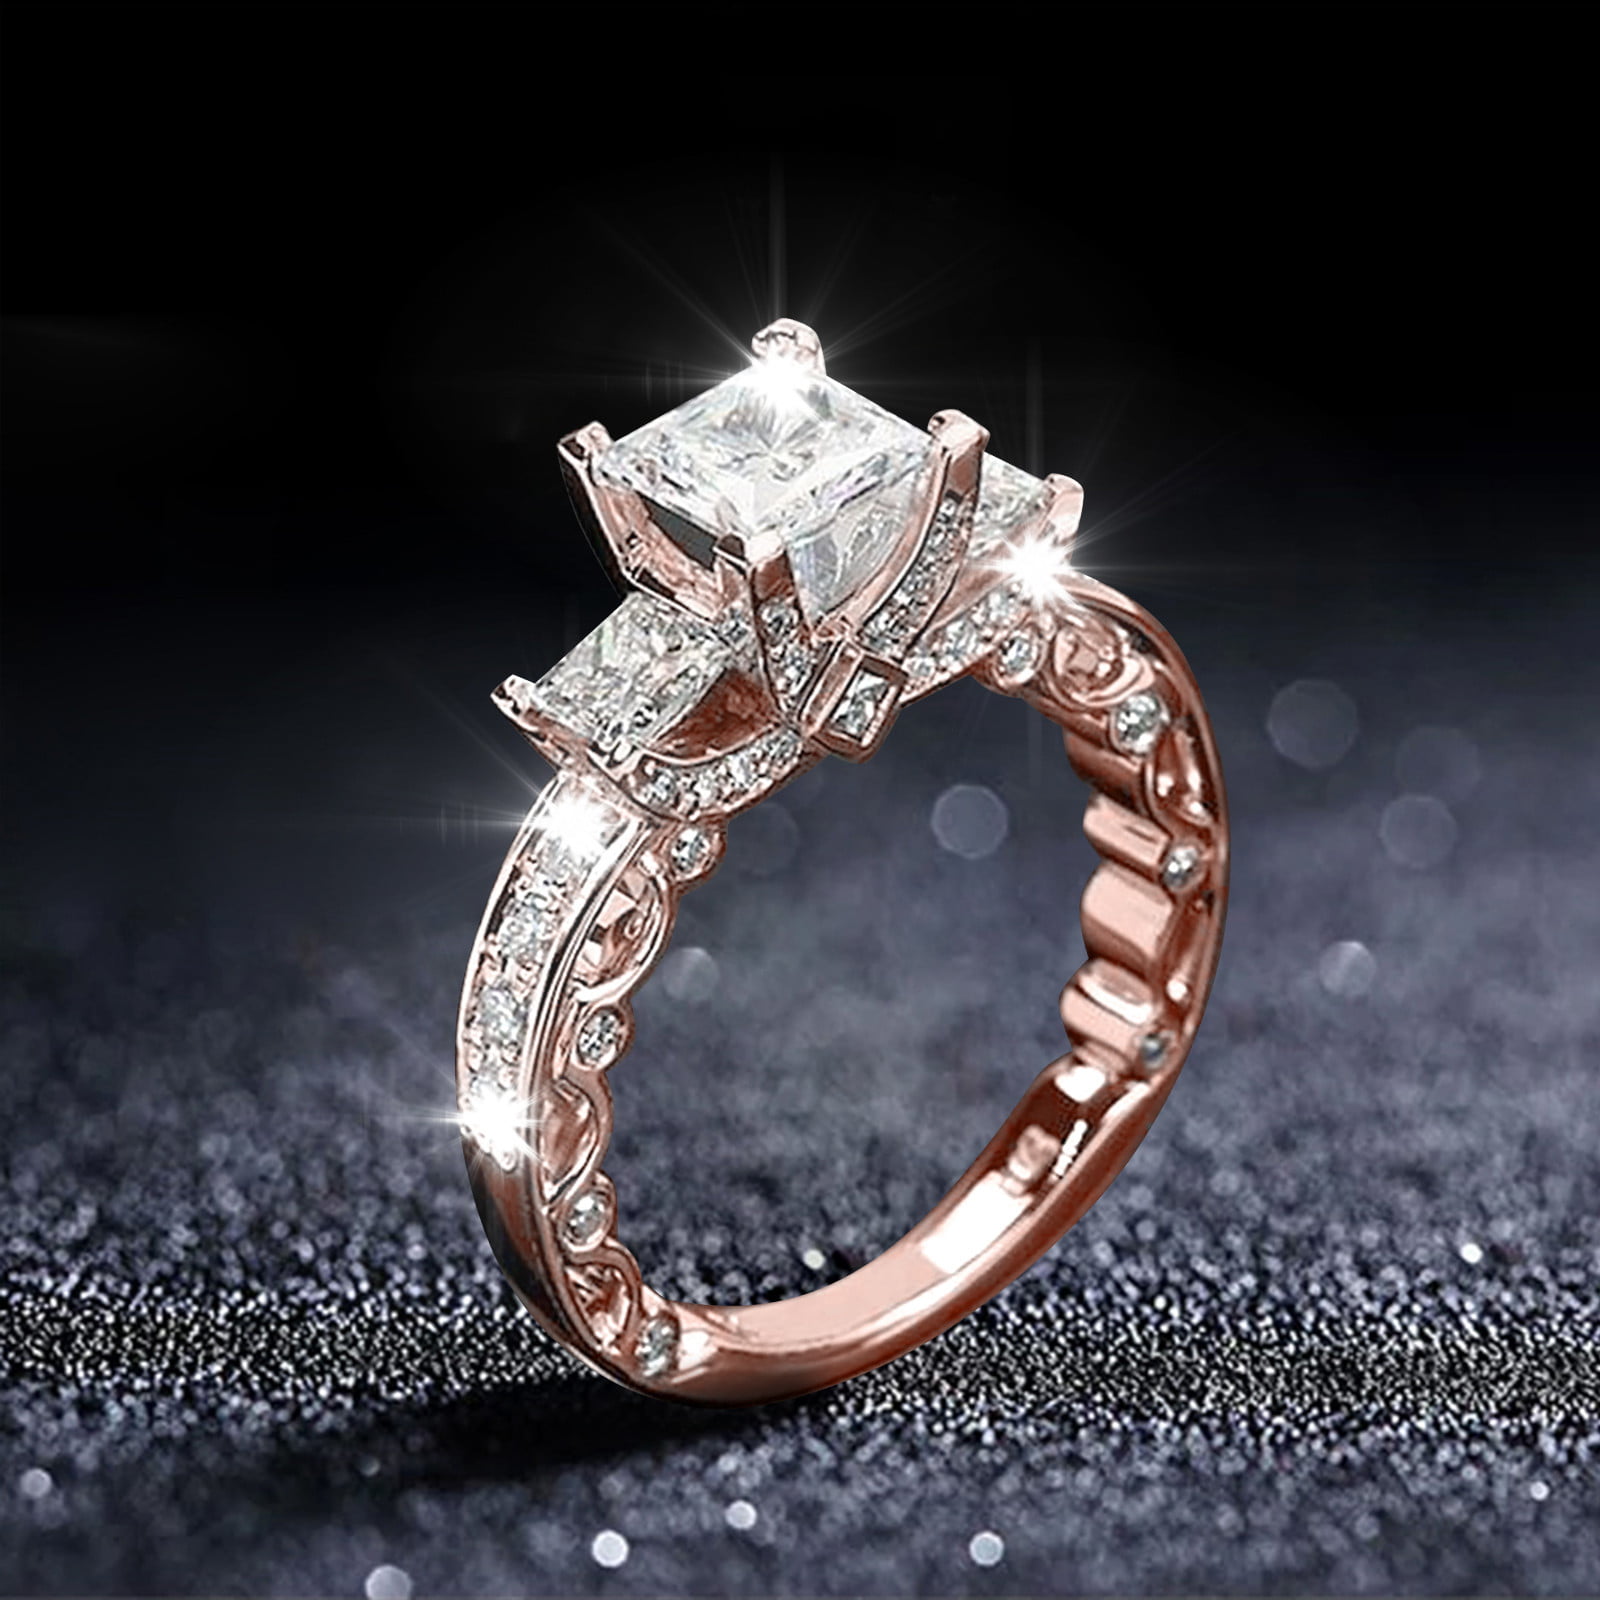 Valentines Day Gifts Ring for Women Diamond Popular Exquisite Simple Fashion  Jewelry Popular Accessories Women's Ring Gifts for Women - Walmart.com